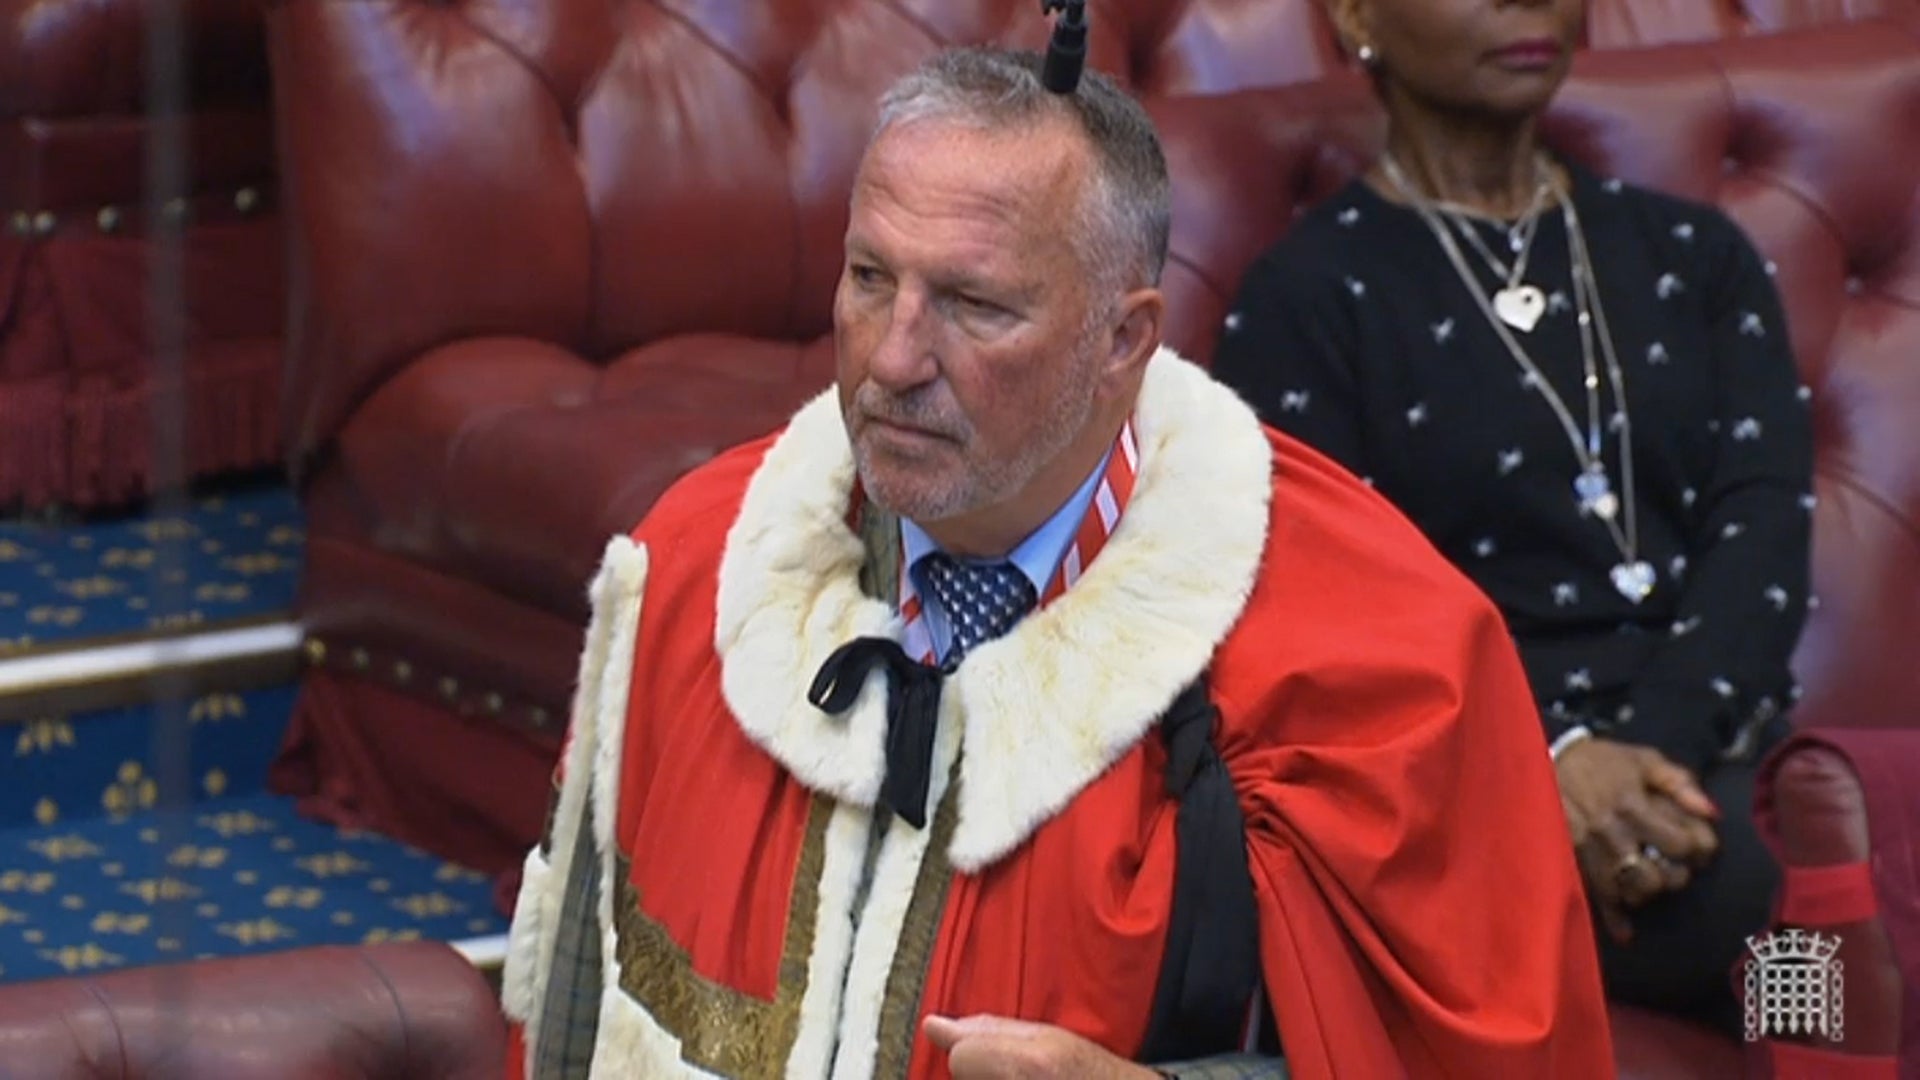 Ian Botham takes his seat in the House of Lords